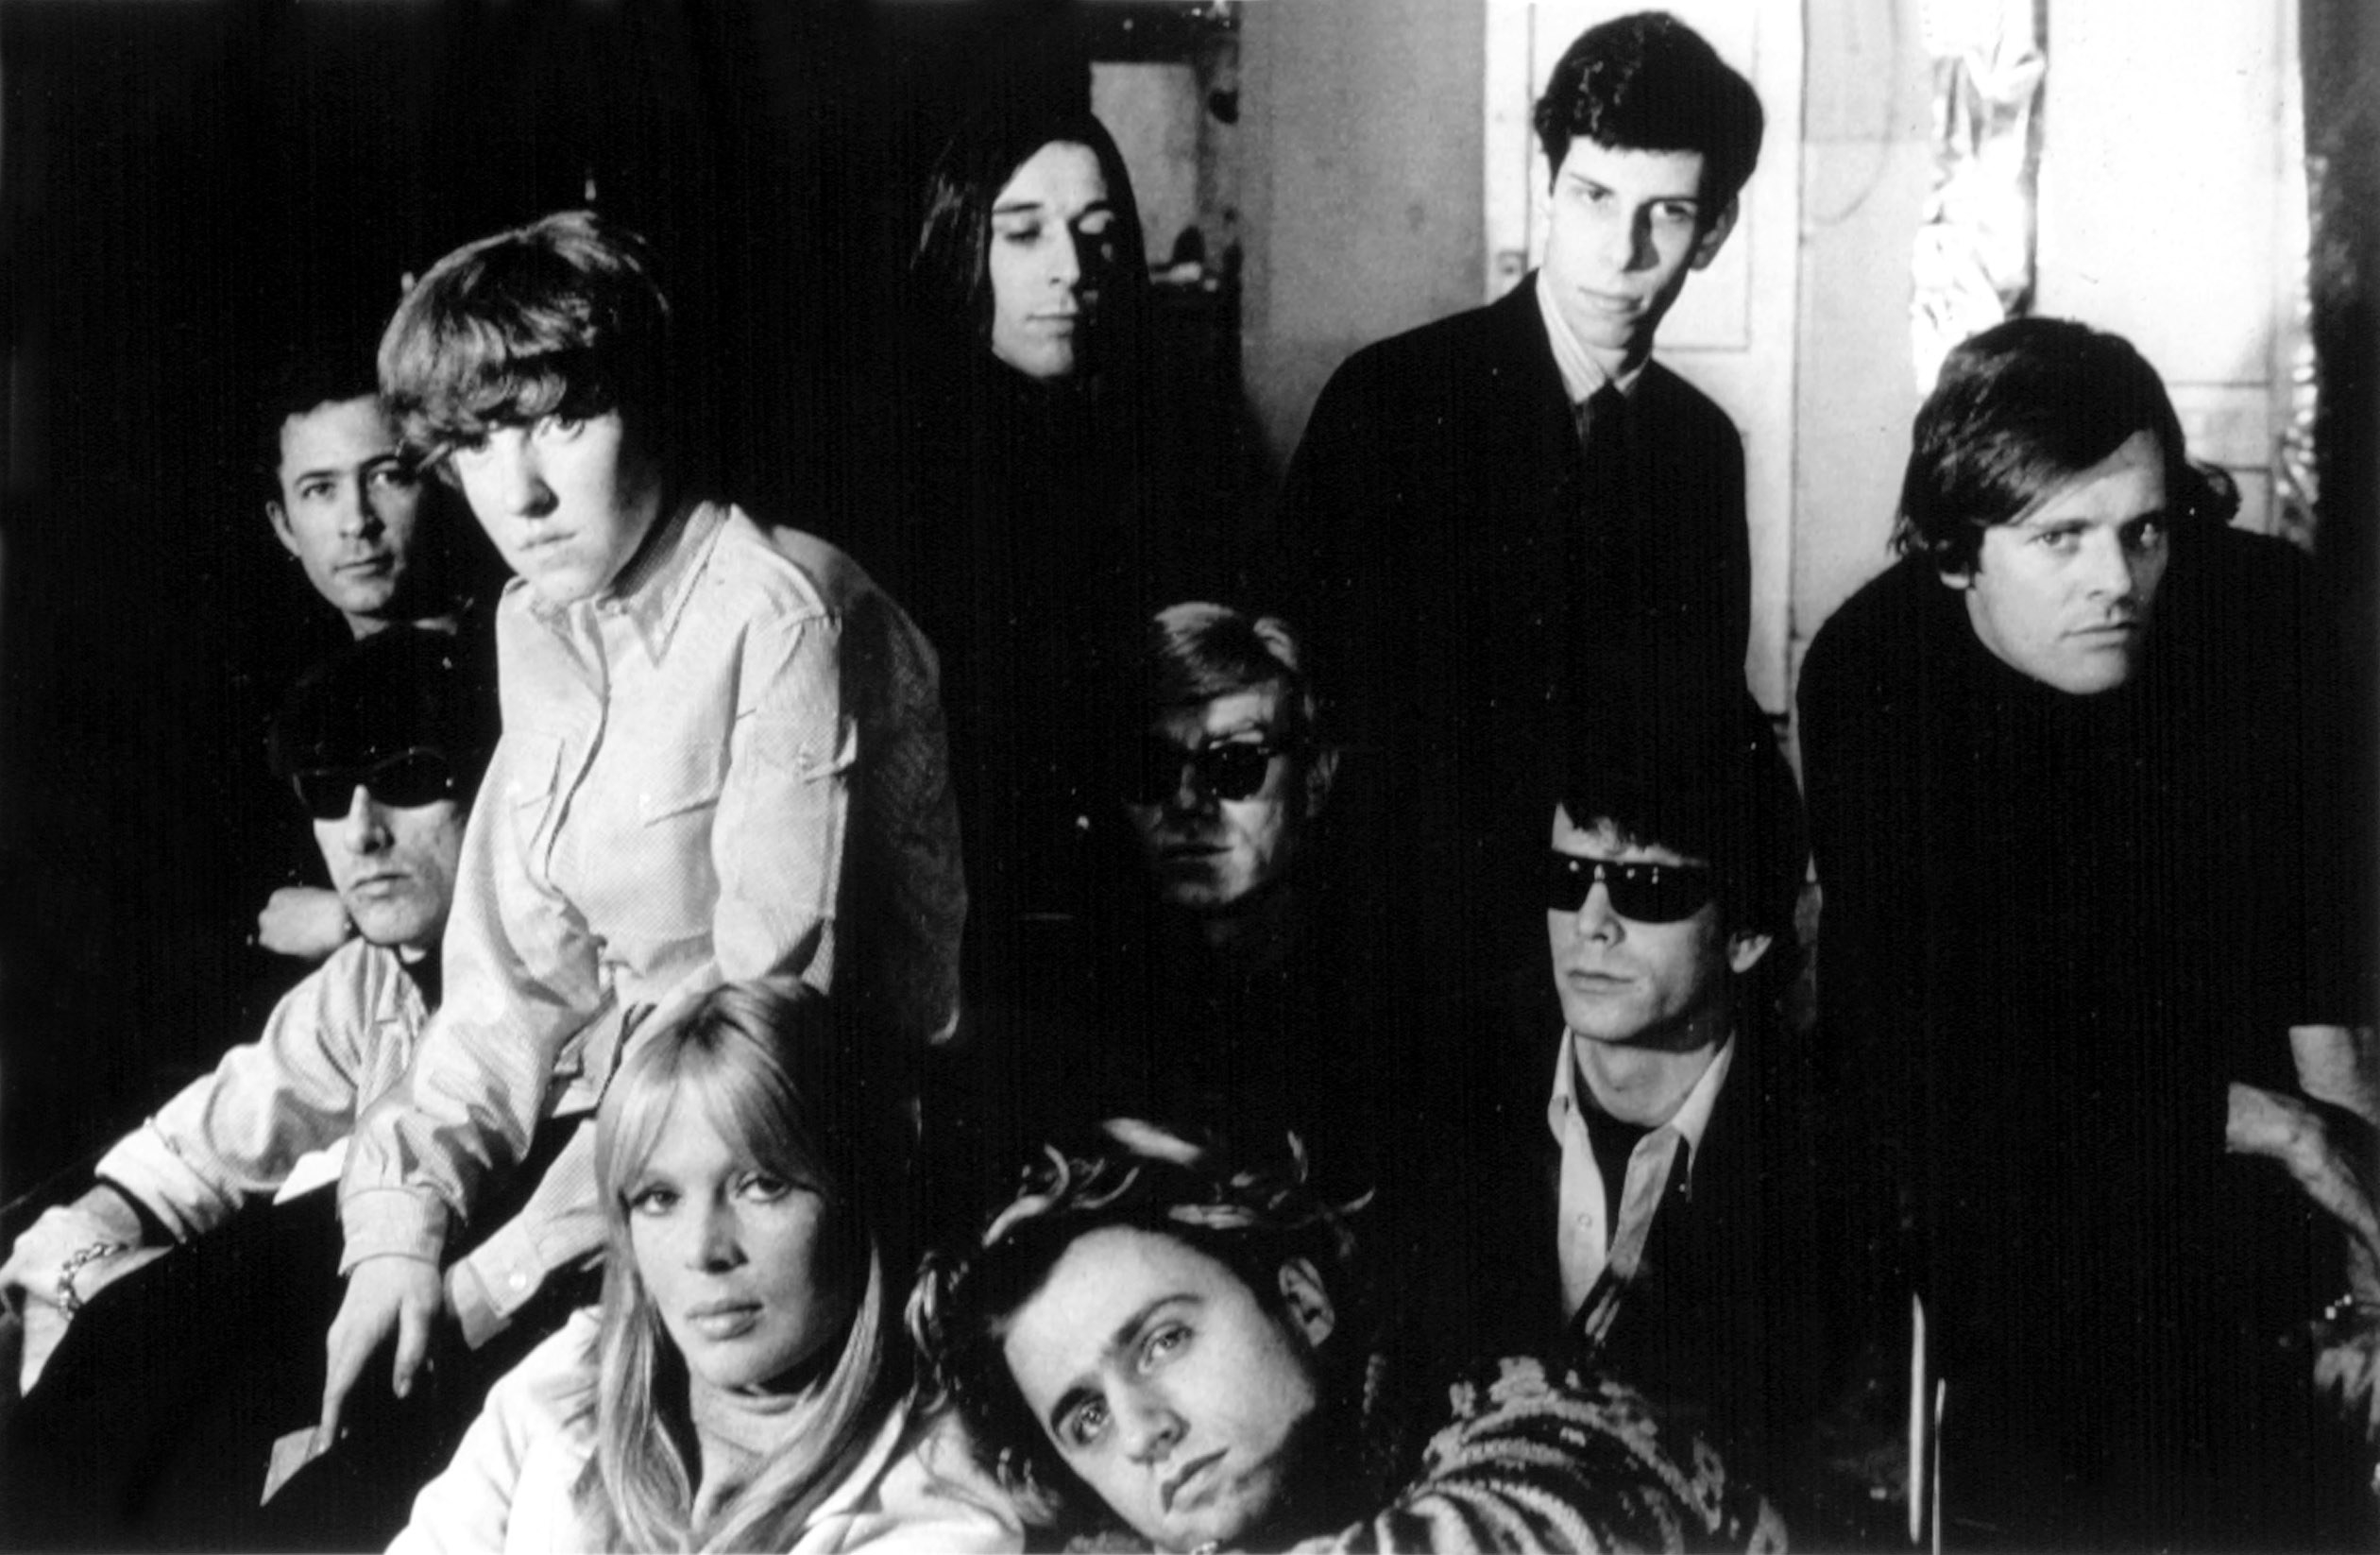 Andy Warhol, Nico, Paul Morrisey, and Gerard Melanga sit together with the members of The Velvet Underground